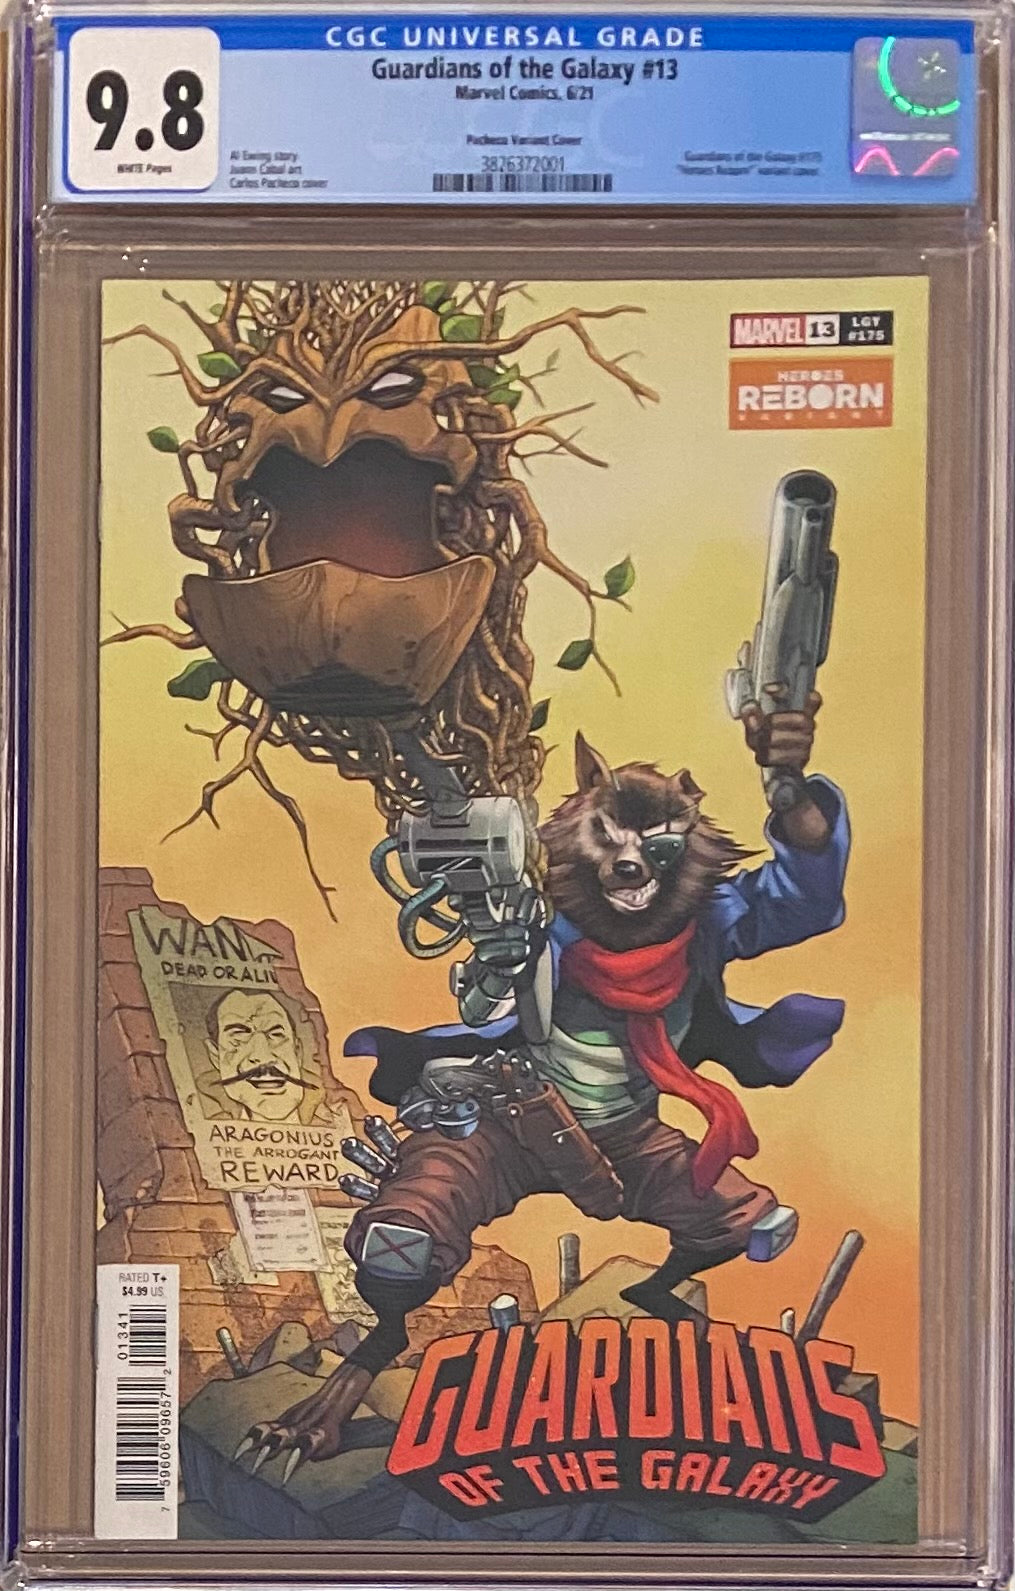 Guardians of the Galaxy #13 "Heroes Reborn" Variant CGC 9.8